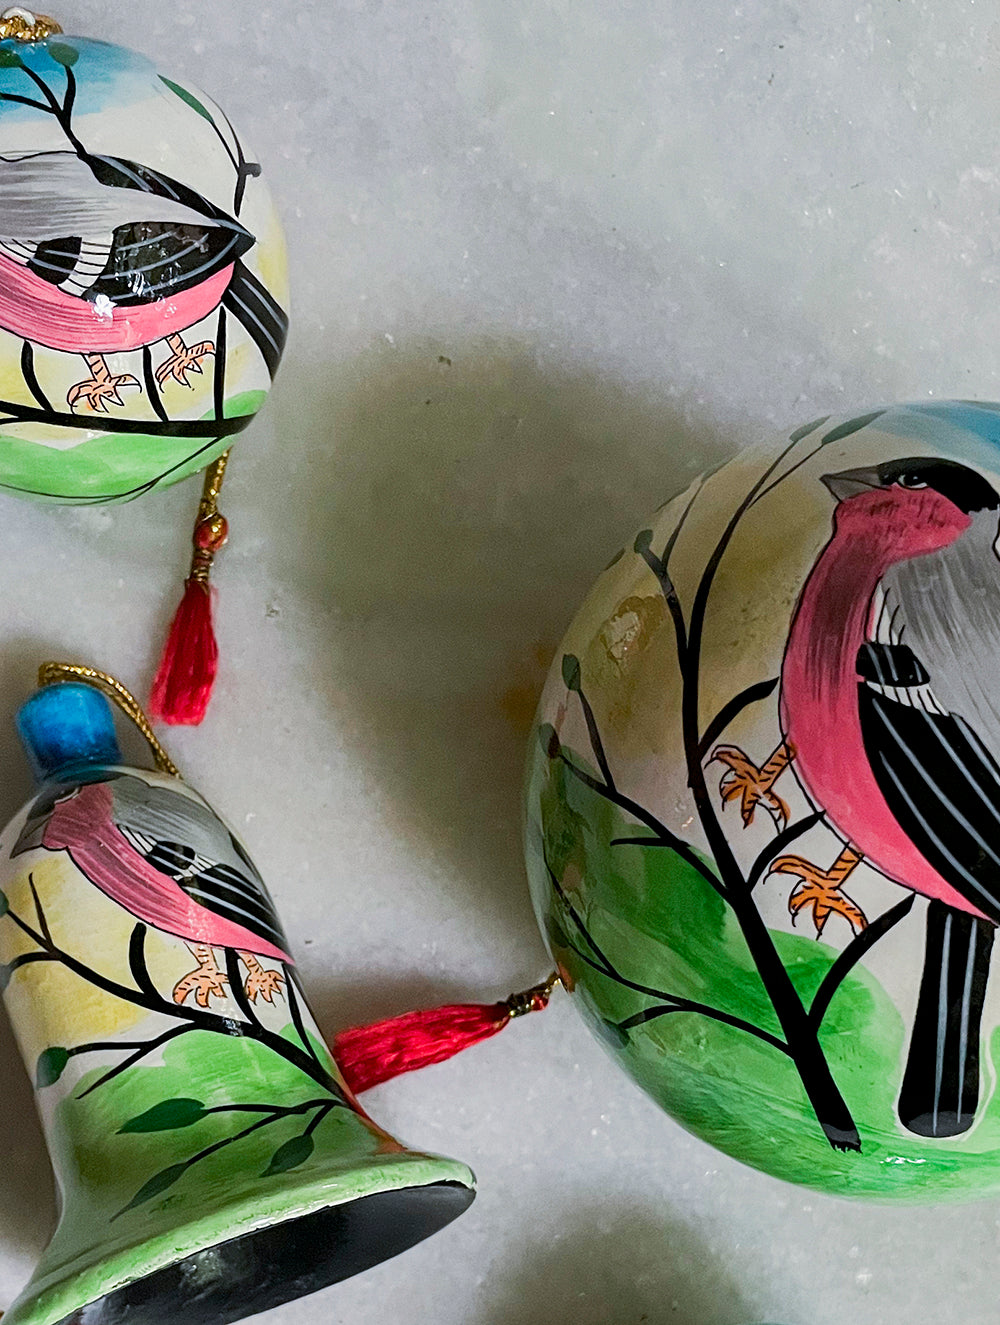 Load image into Gallery viewer, Kashmiri Art Xmas Decorations - Set of 5 (4 Baubles, 1 Bell)